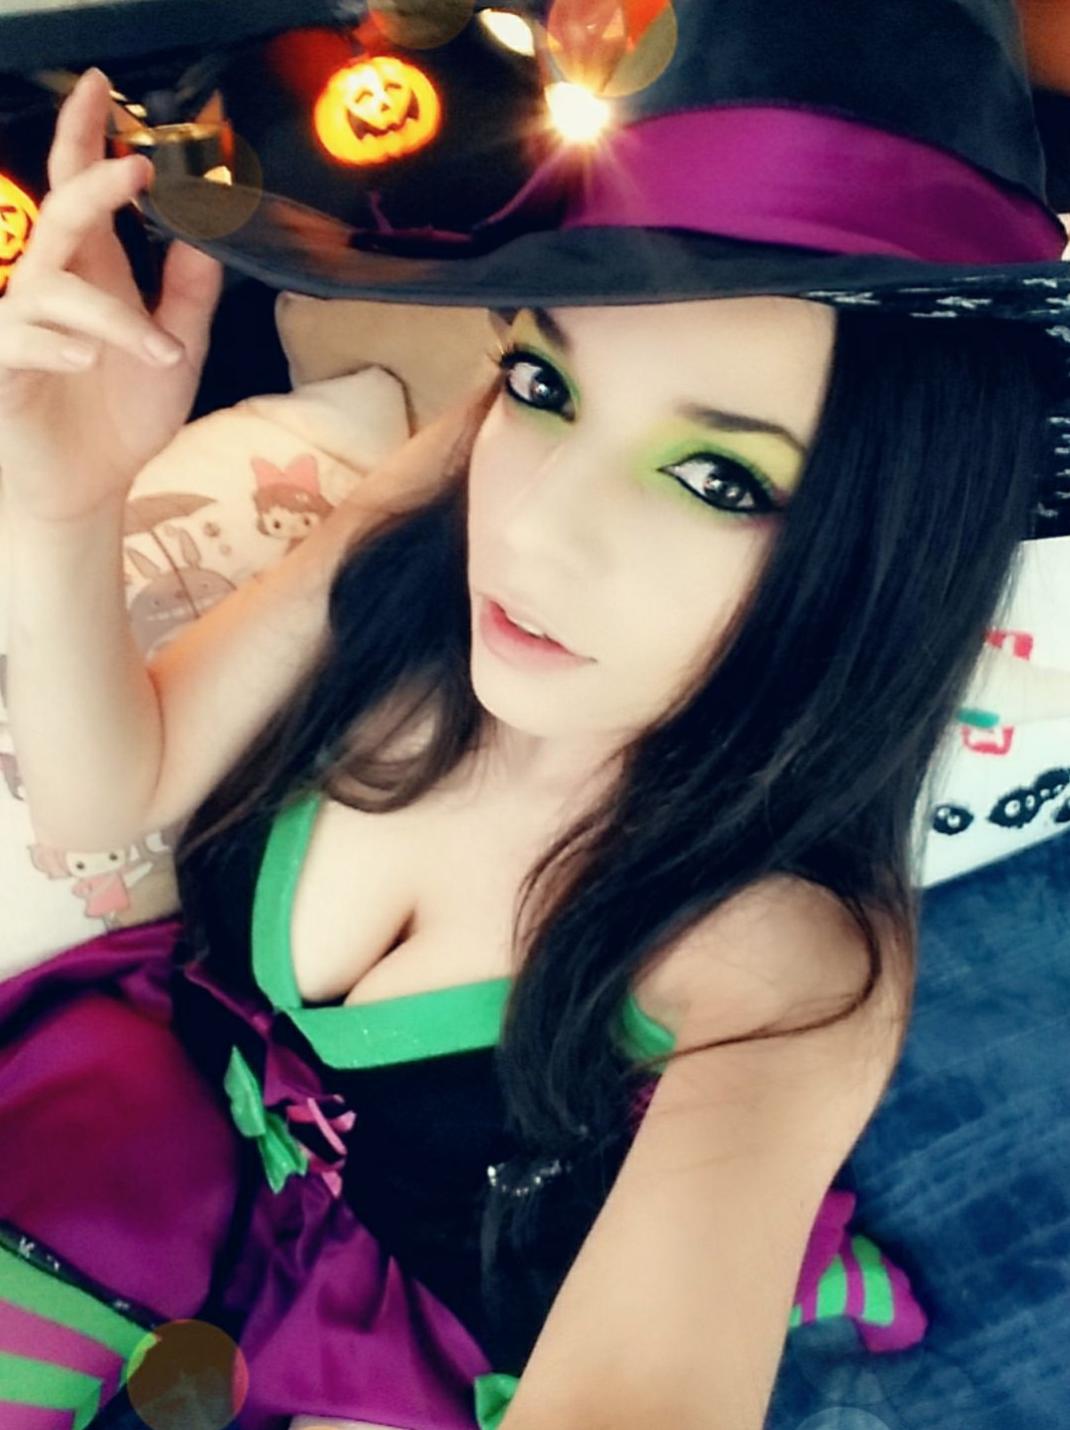 “Witchy Kat is online!! https://t.co/l3Gtwf4uPu” 